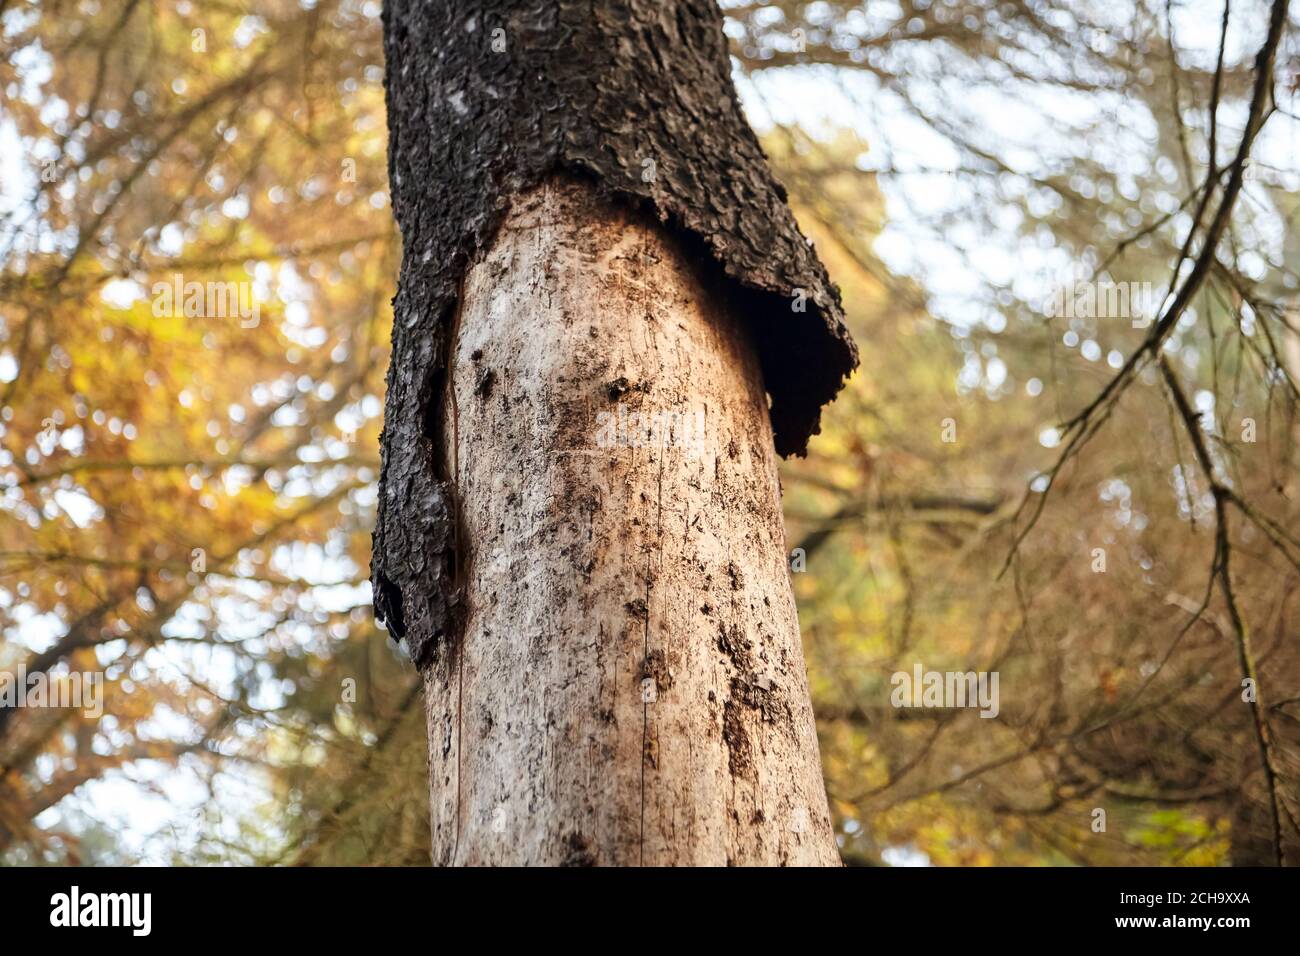 Dry trunk of spruce with exfoliating bark, Diseased fir tree damaged by bark beetle, nature, autumn forest Stock Photo